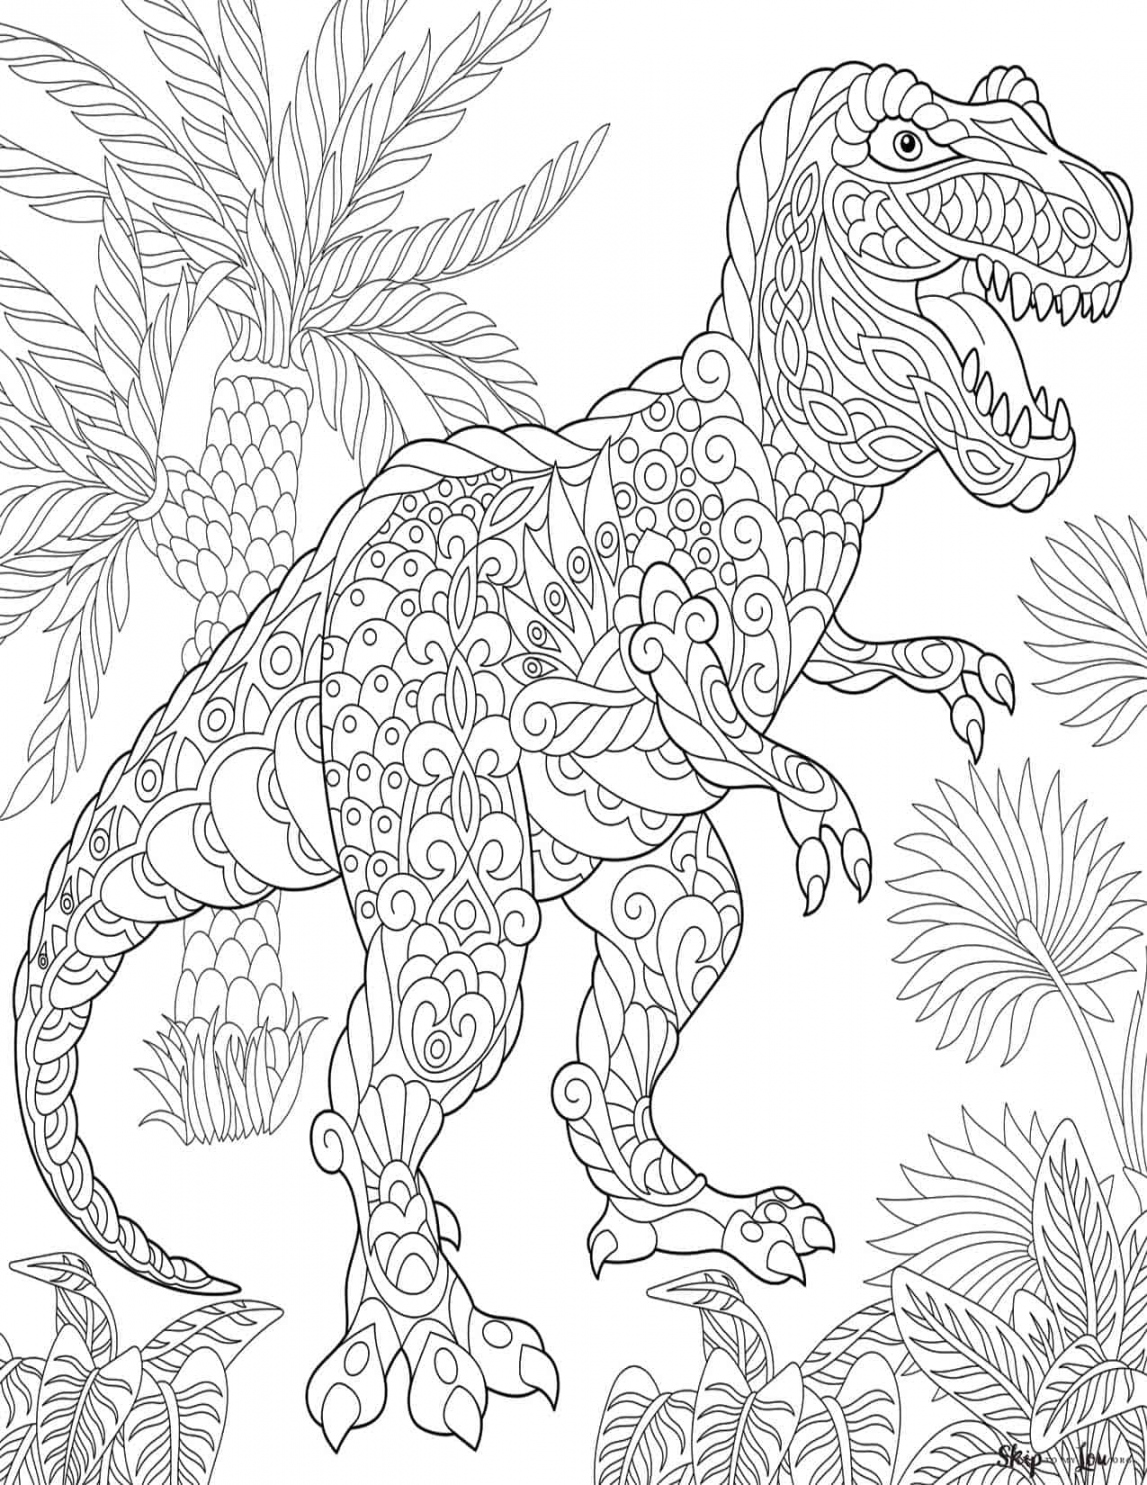 Free Dinosaur Coloring Pages Printable - Printable - Dinosaur Coloring Pages Free Printables  Skip To My Lou